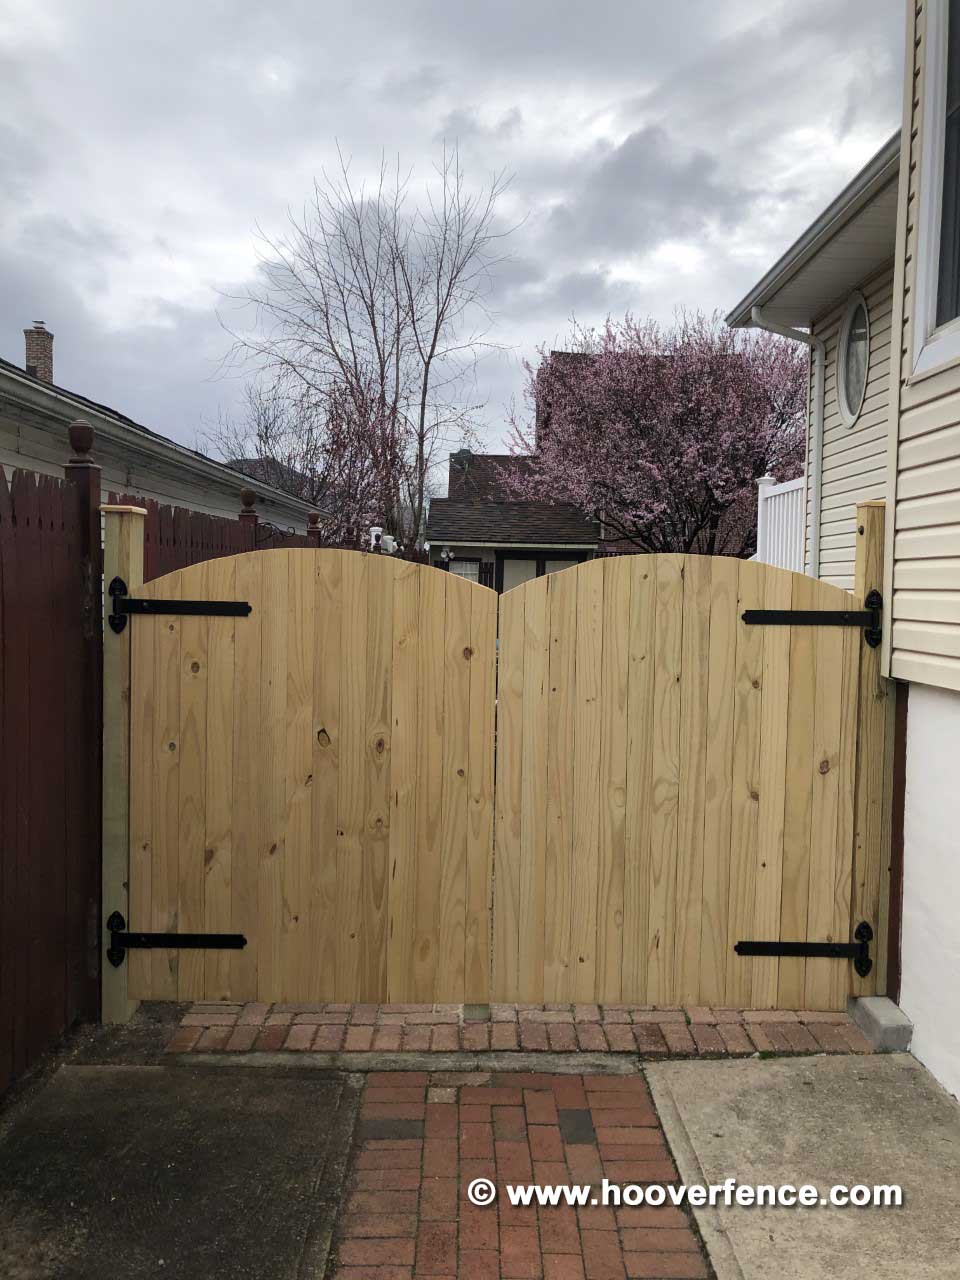 Customer Install - Convex Top Double Wood Gate Hung Using Snug Cottage 8292-18SP Old Fashioned Heavy Duty Hinges